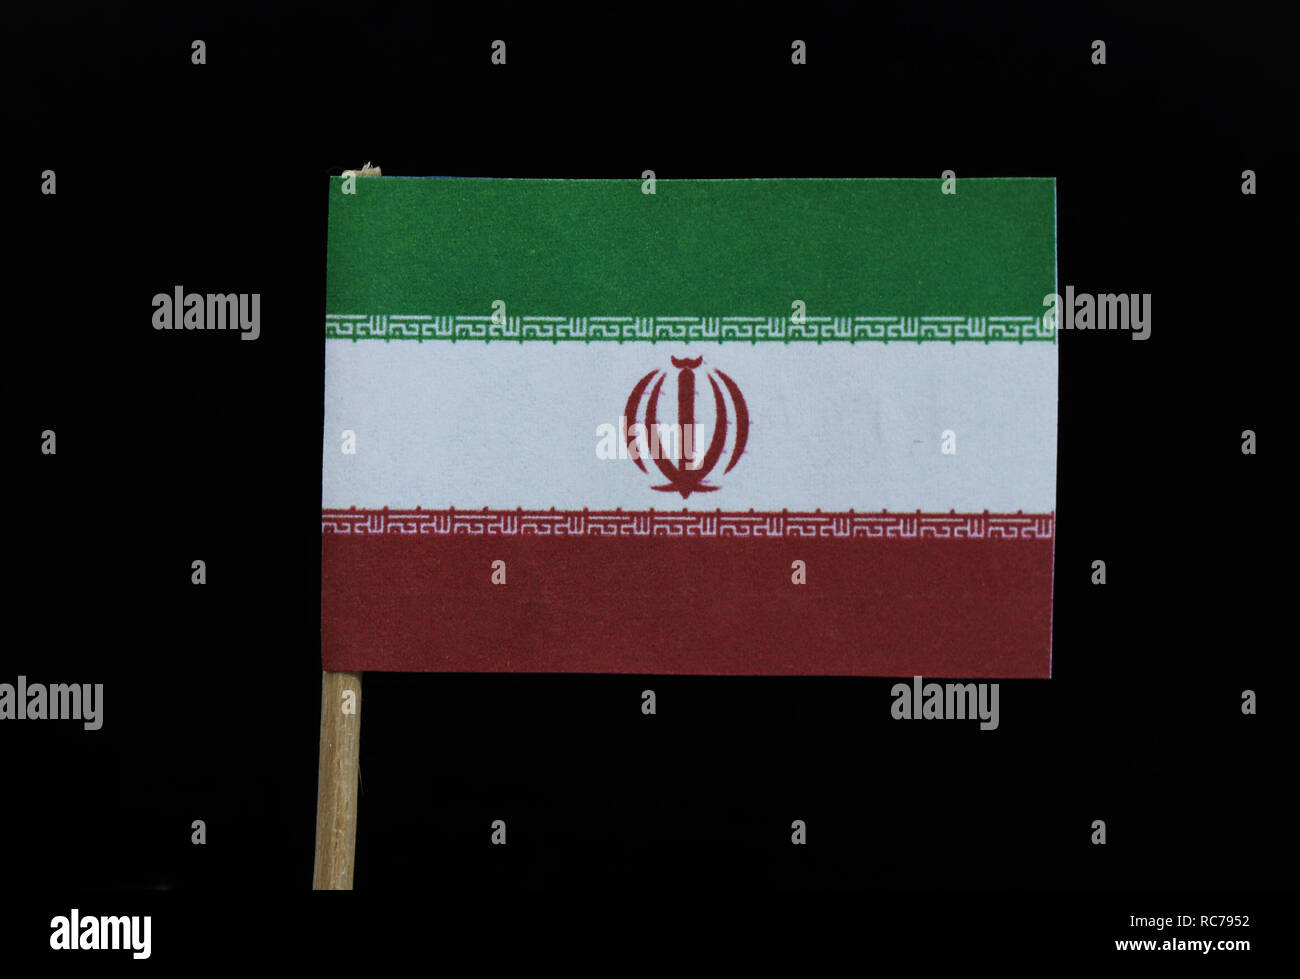 A unique flag of Iran on toothpick on black background. A horizontal tricolor of green, white and red with the national emblem in red centred on the w Stock Photo